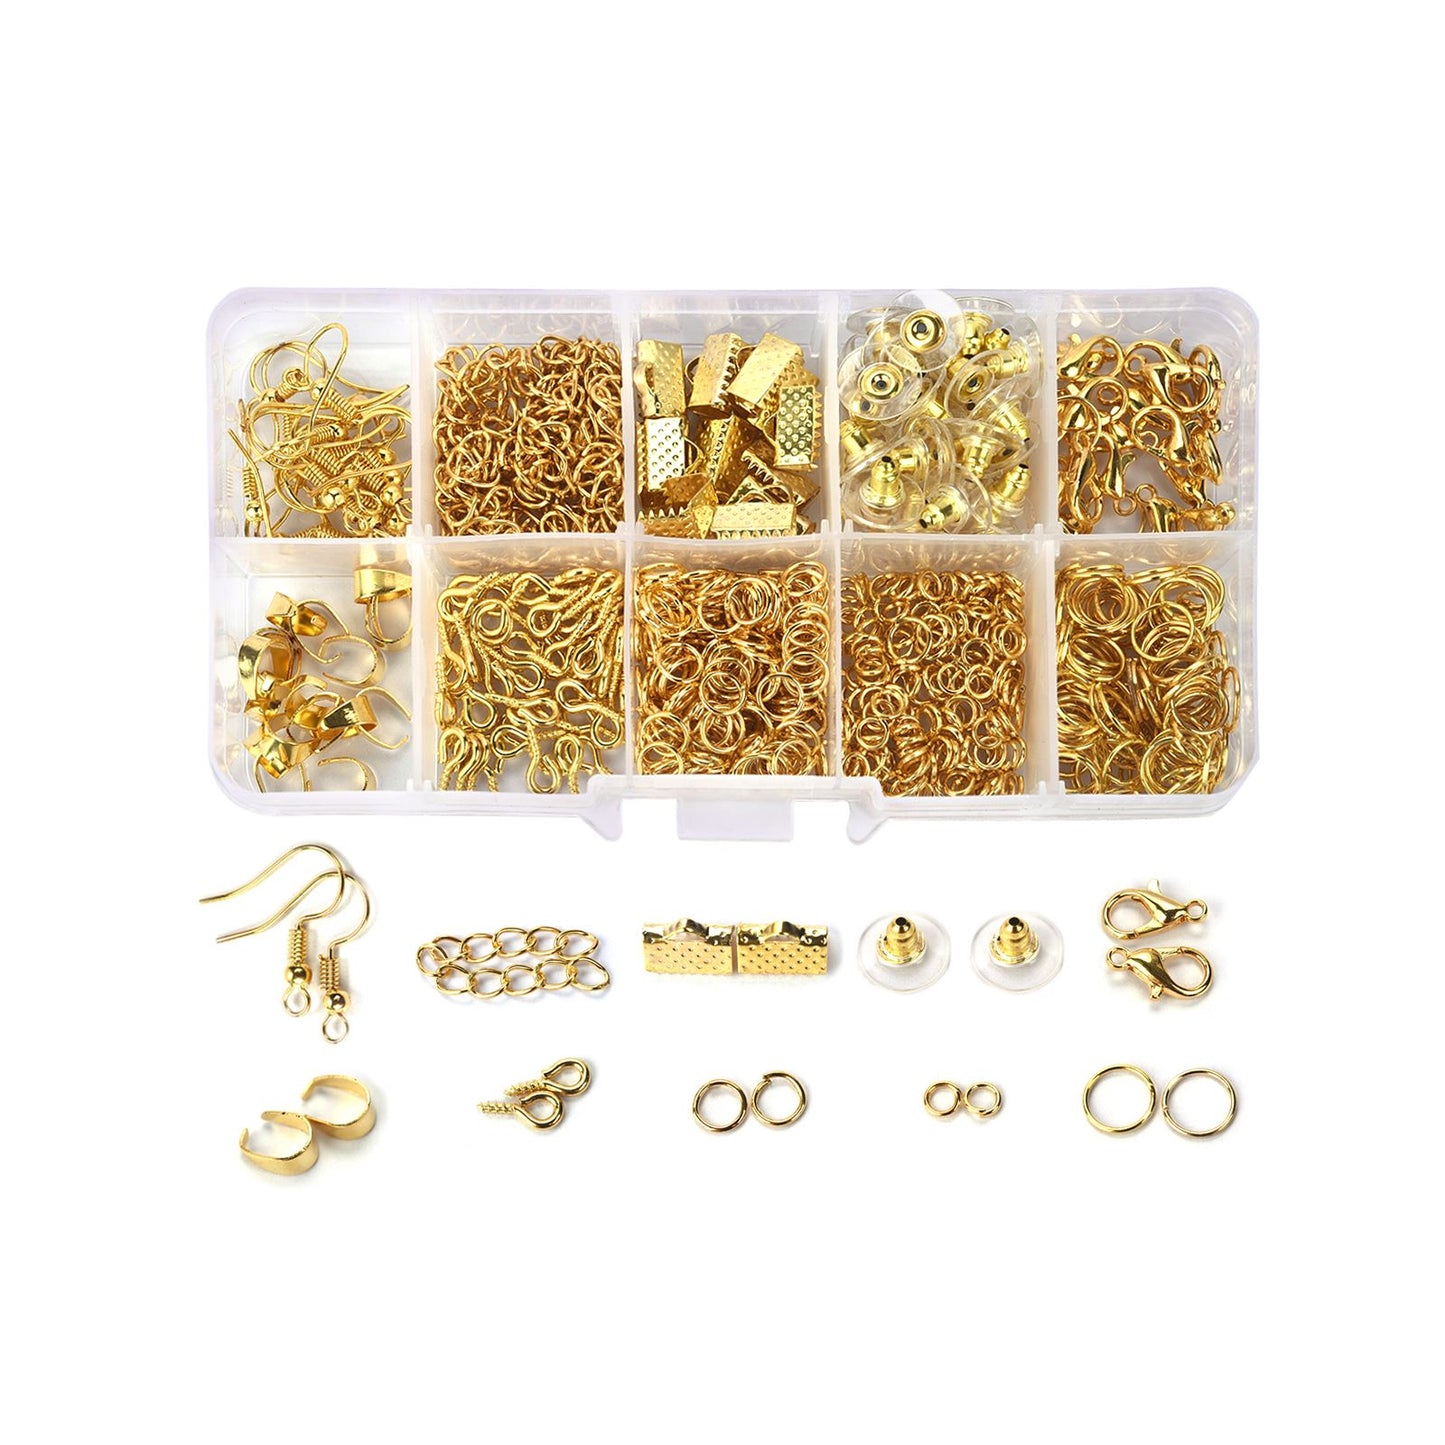 450-860pcs/Box Jewelry Making Kits Lobster Clasp Open Jump Rings End Crimps Beads Box Sets Handmade Bracelet Necklace Findings